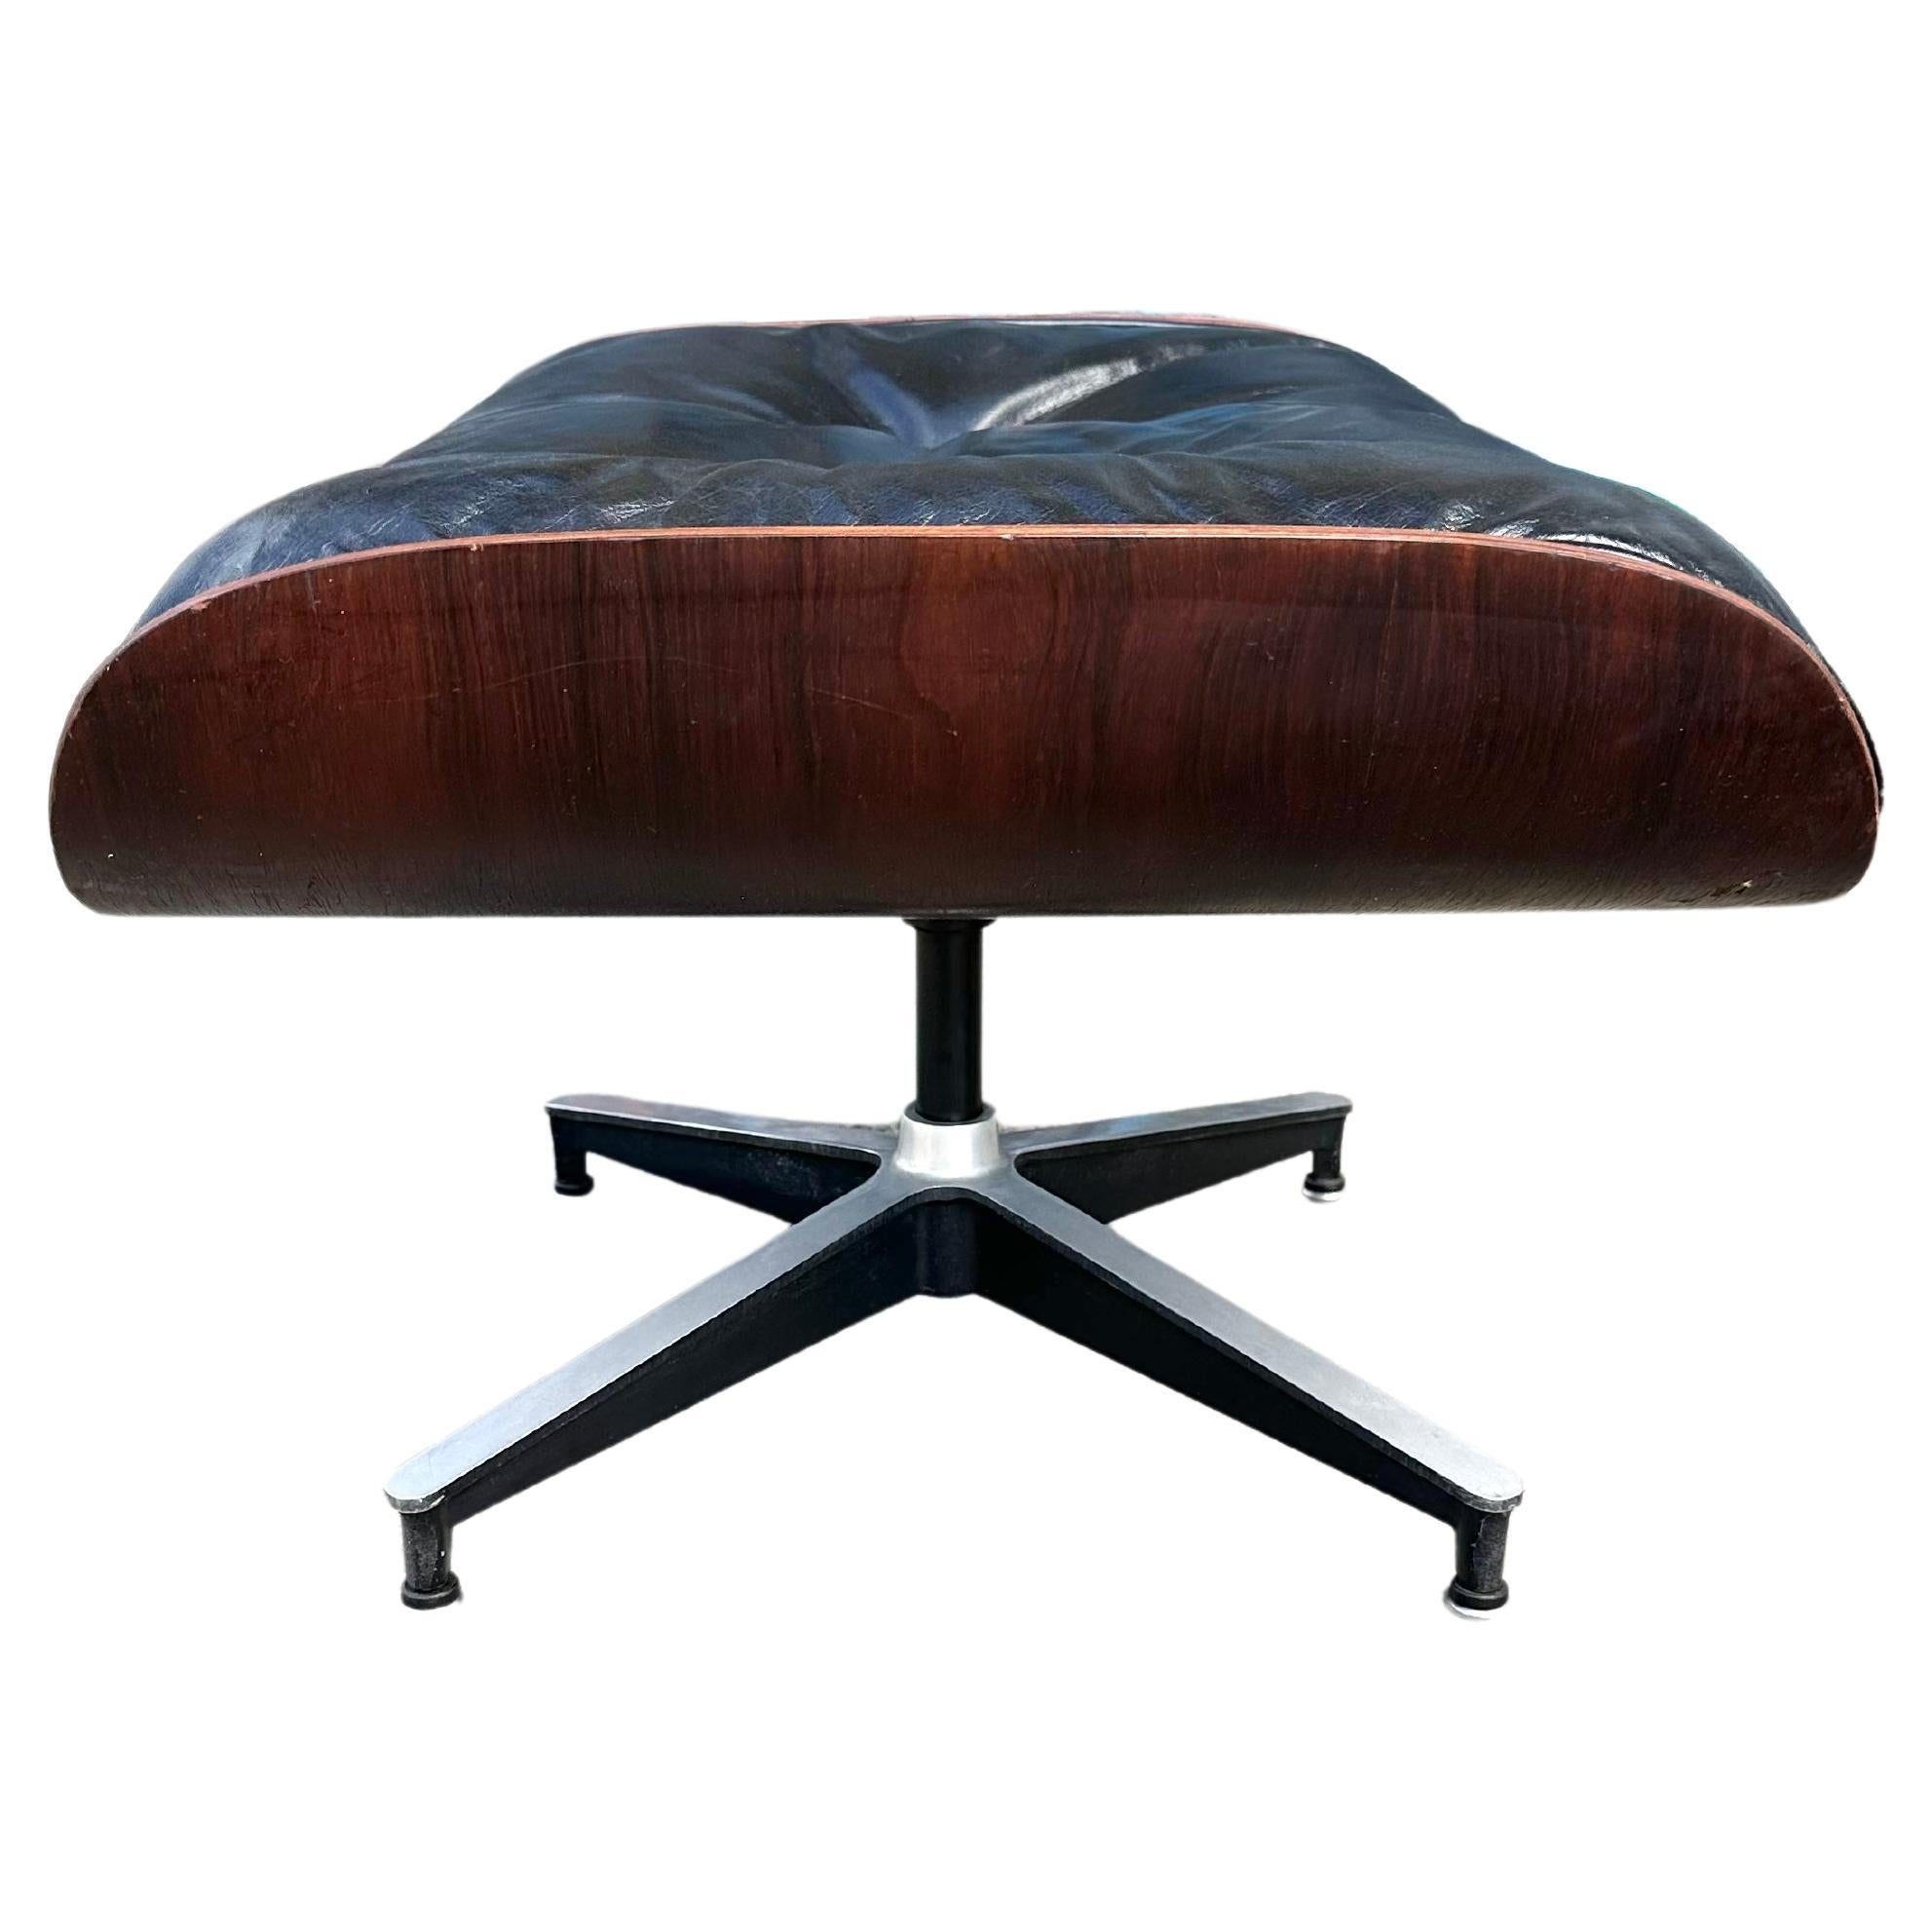 Hard to find single ottoman for the original Herman Miller lounge chair. Sale for ottoman only. Made from cast aluminum, black leather, and Brazilian rose wood. In good condition. All screws, buttons, and feet intact. Signed and guaranteed